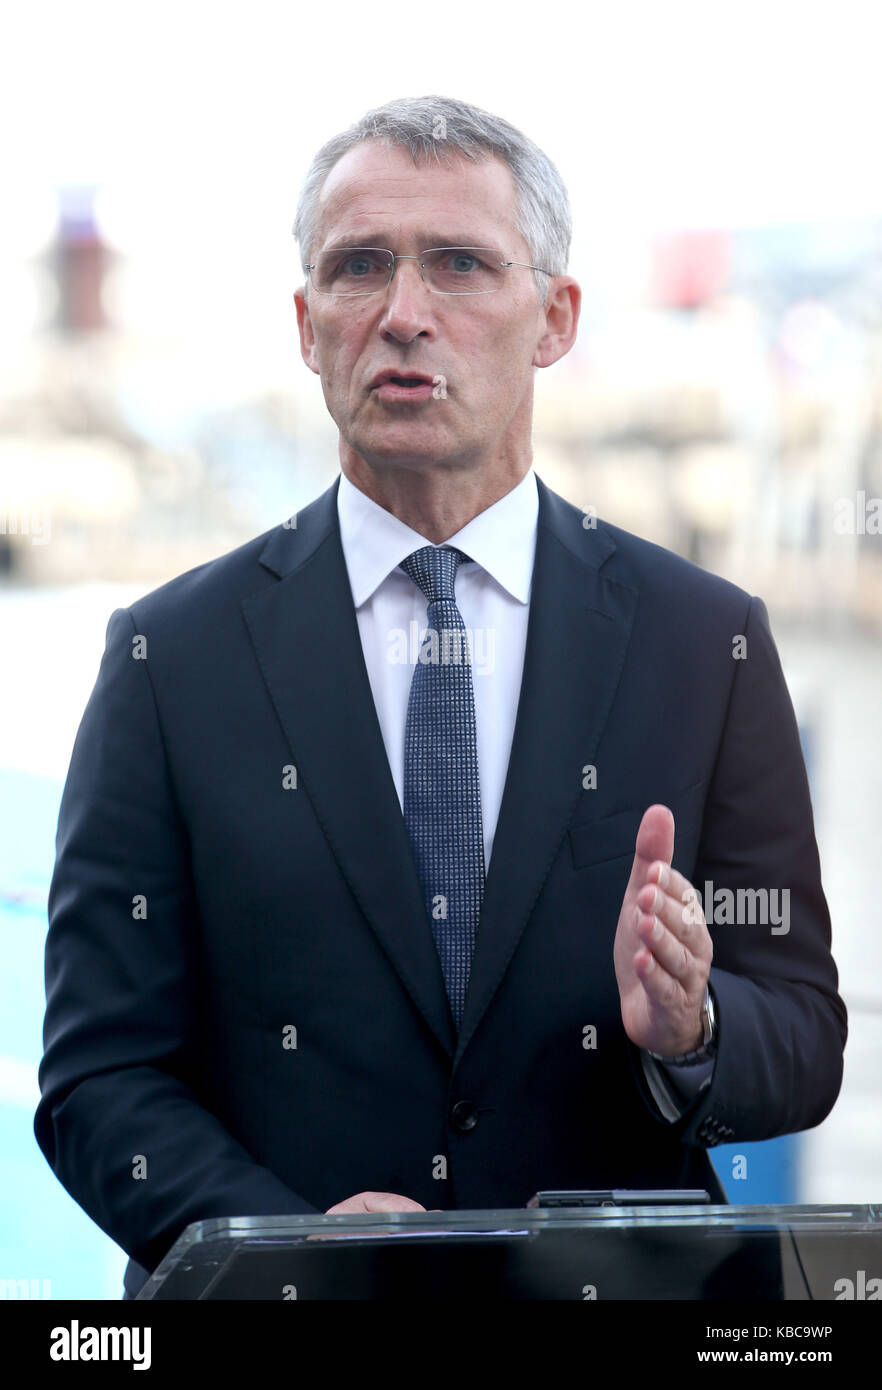 Nato Secretary General Jens Stollenberg speaks to the media alongside the Vanguard-class nuclear deterrent submarine HMS Vengeance during a visit to HM Naval Base Clyde, Faslane, where bilateral talks on collective global security were held. Stock Photo